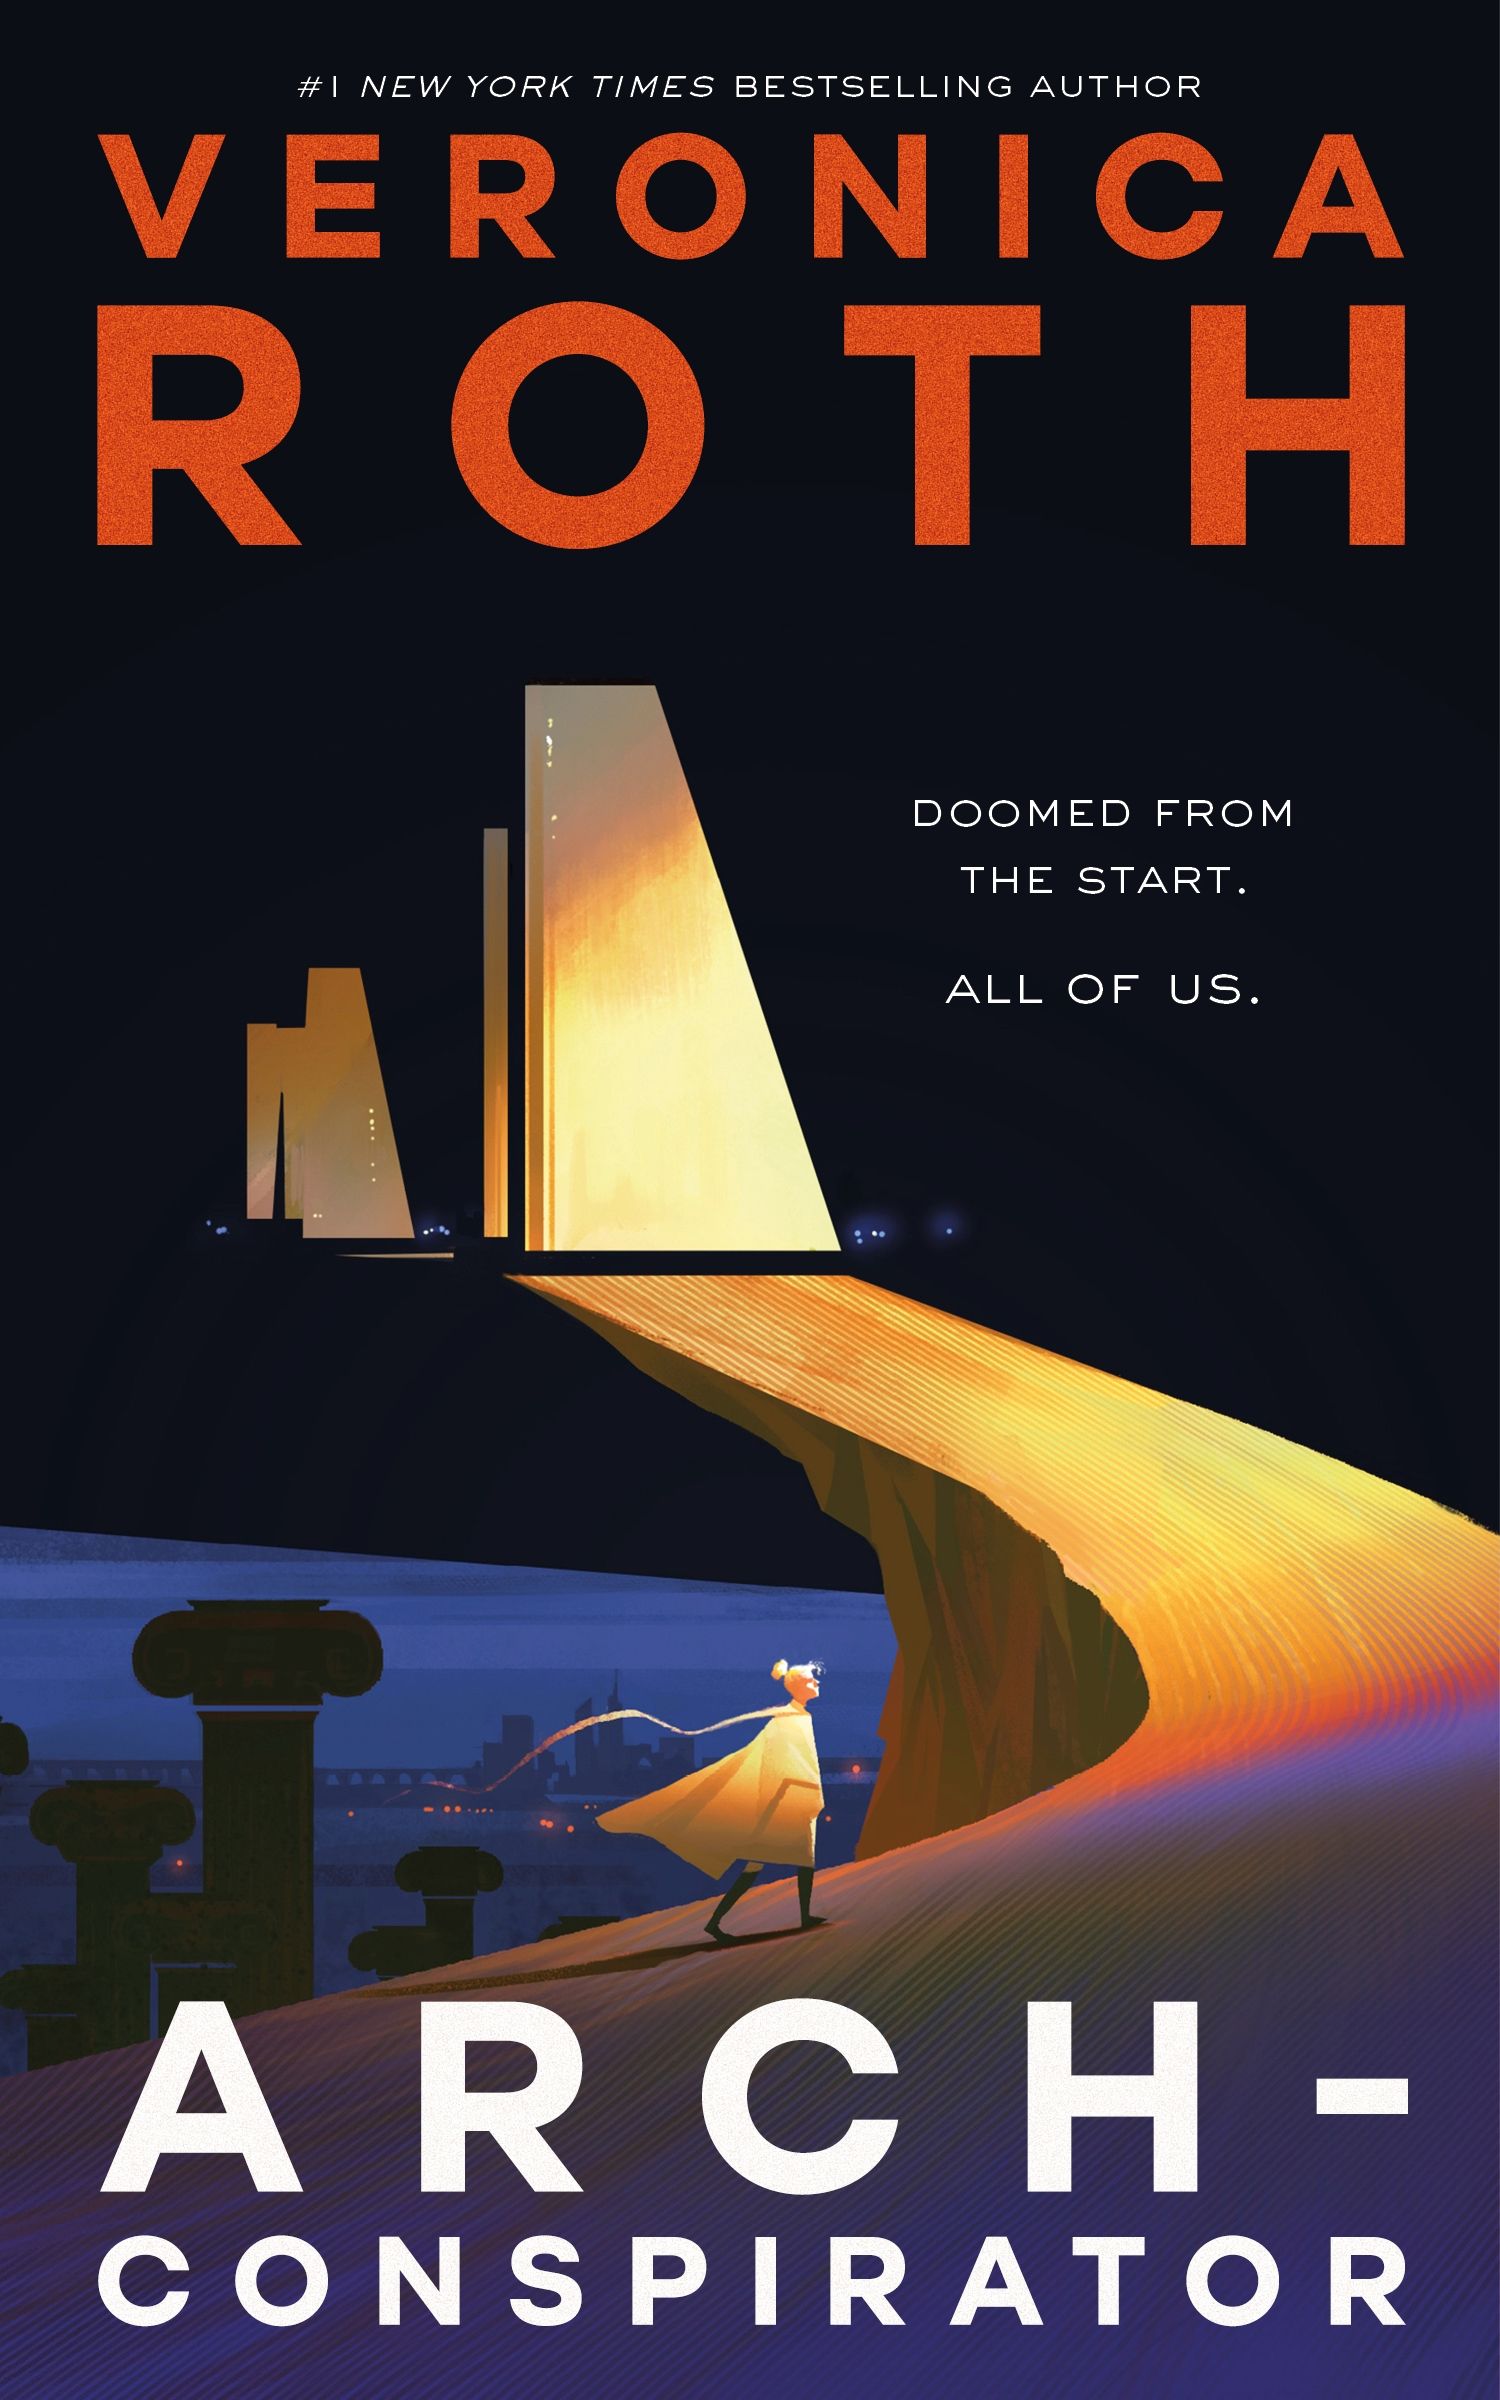 Book cover for Arch-Conspirator by Veronica Roth